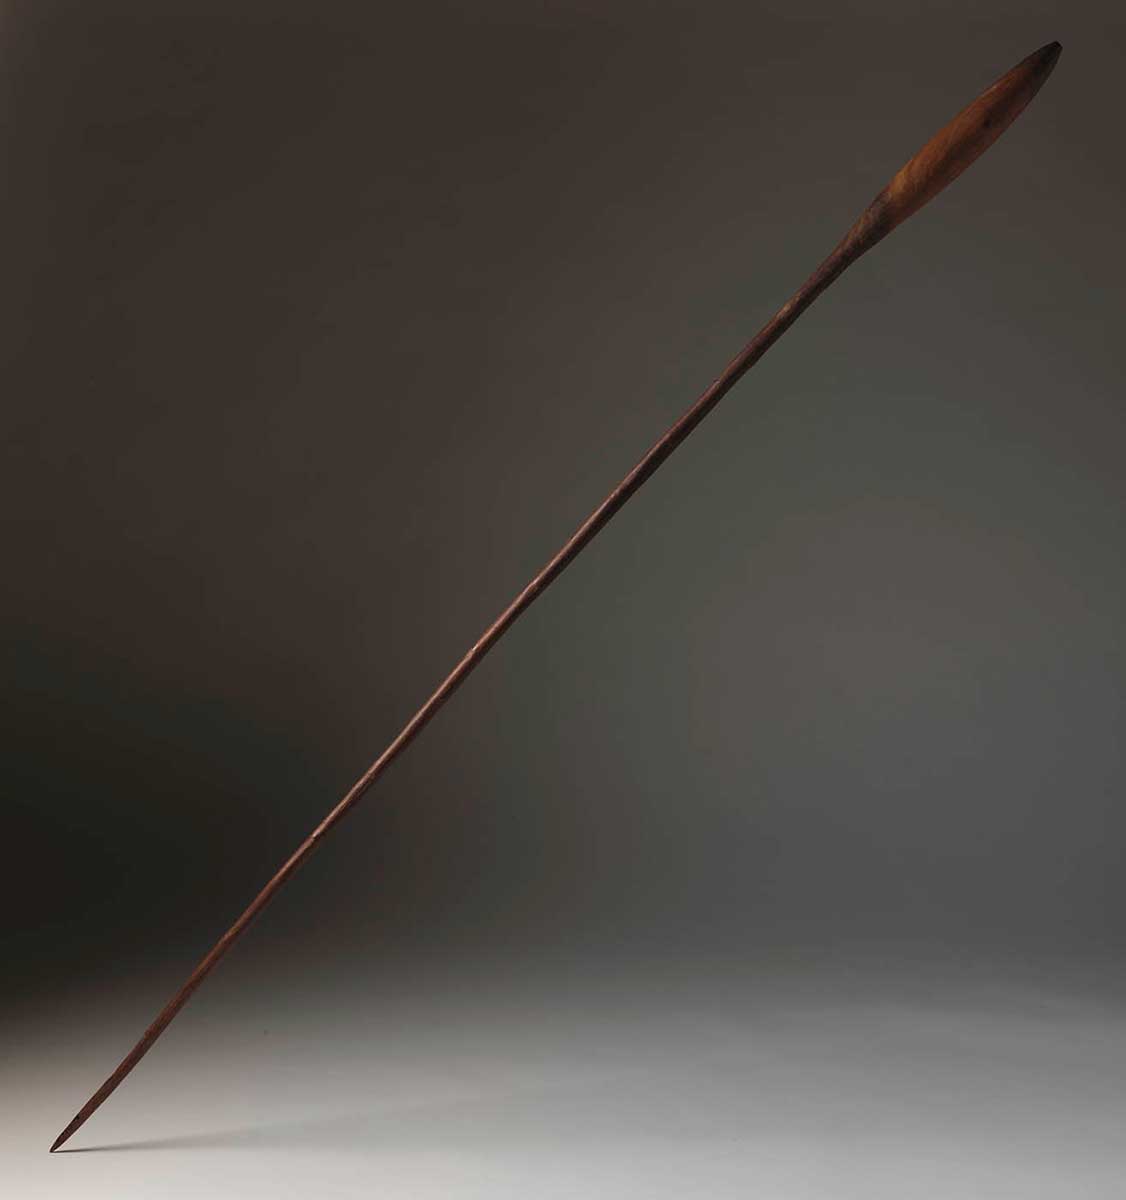 A long, cylindrical smoothed wooden stick. It has a sharp point at one end and a slightly bulbous section at the other end, about one fifth of the stick in length. The bulbous section is slightly lighter in colour to the rest of the stick. The stick's surface is smooth and shiny, as though it has been polished or covered with a natural lacquer. - click to view larger image